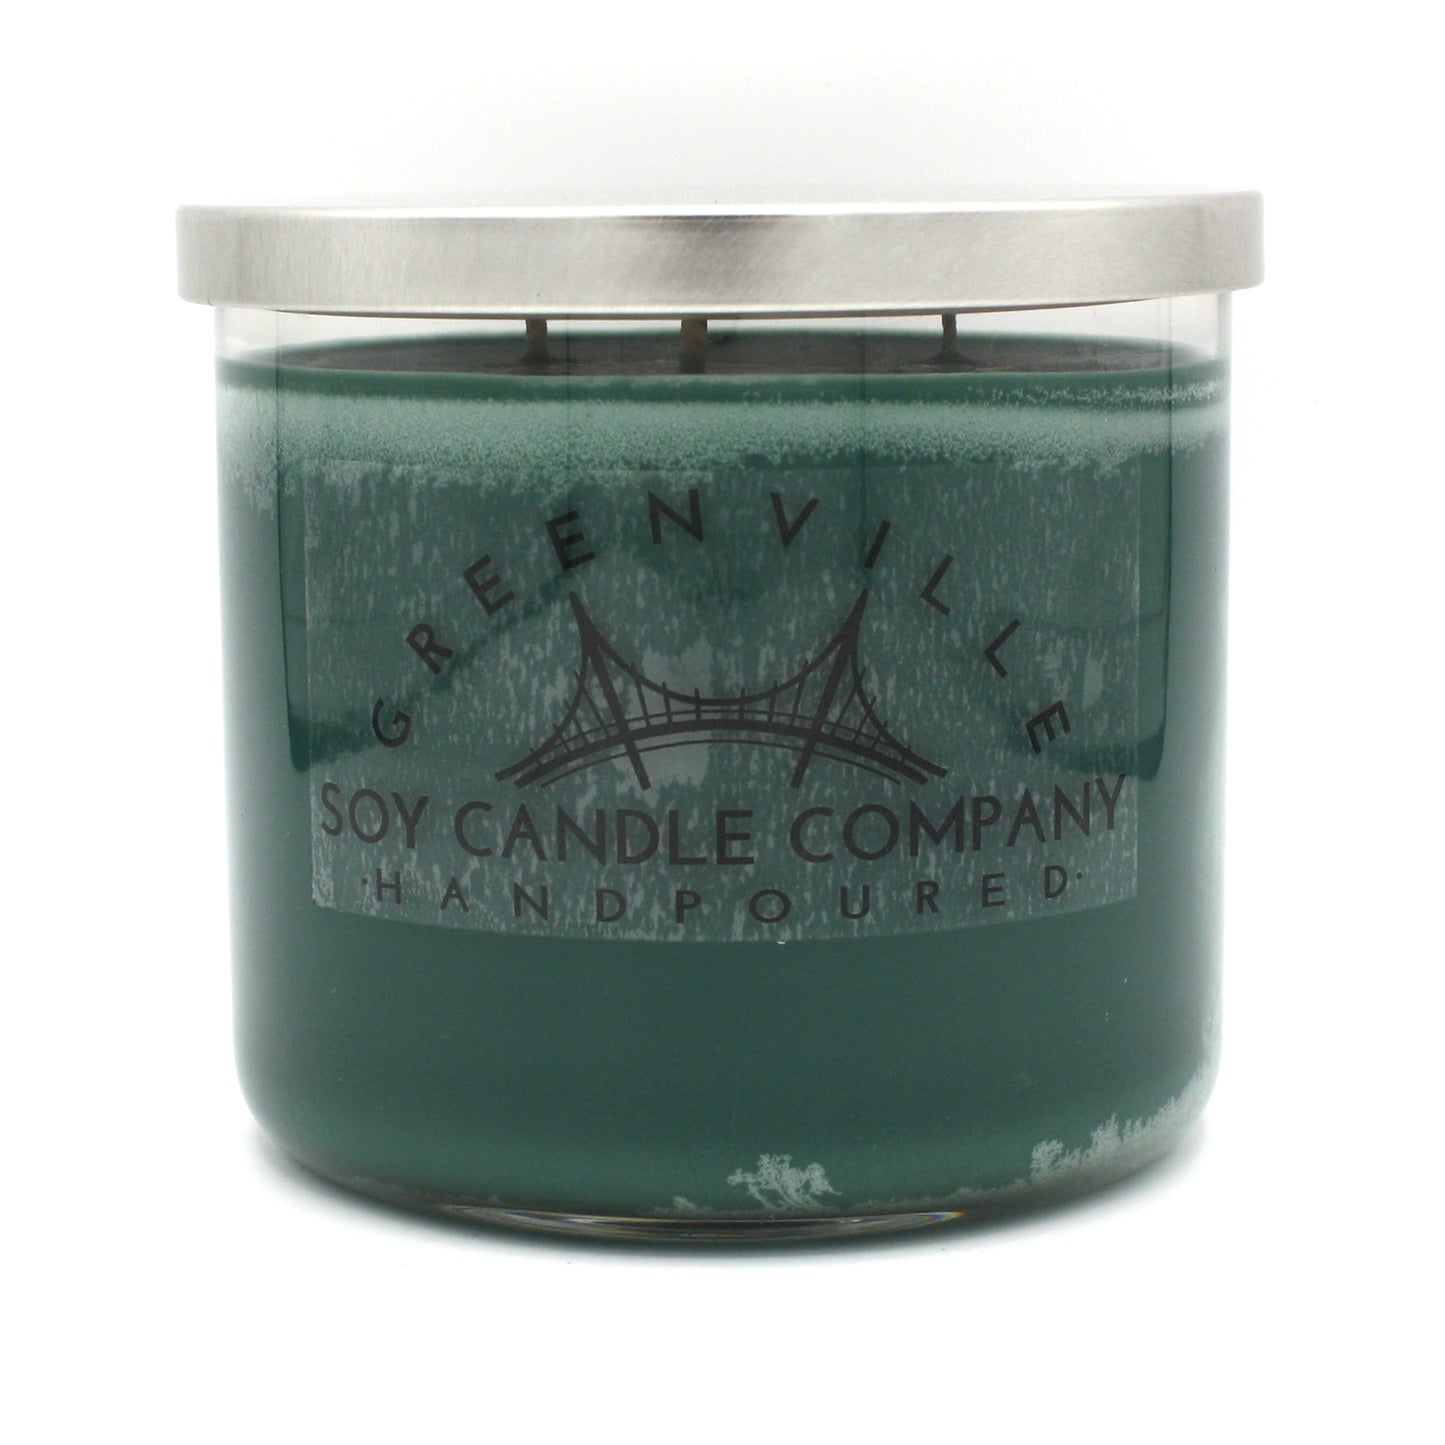 Redwoods, 18oz Soy Candle